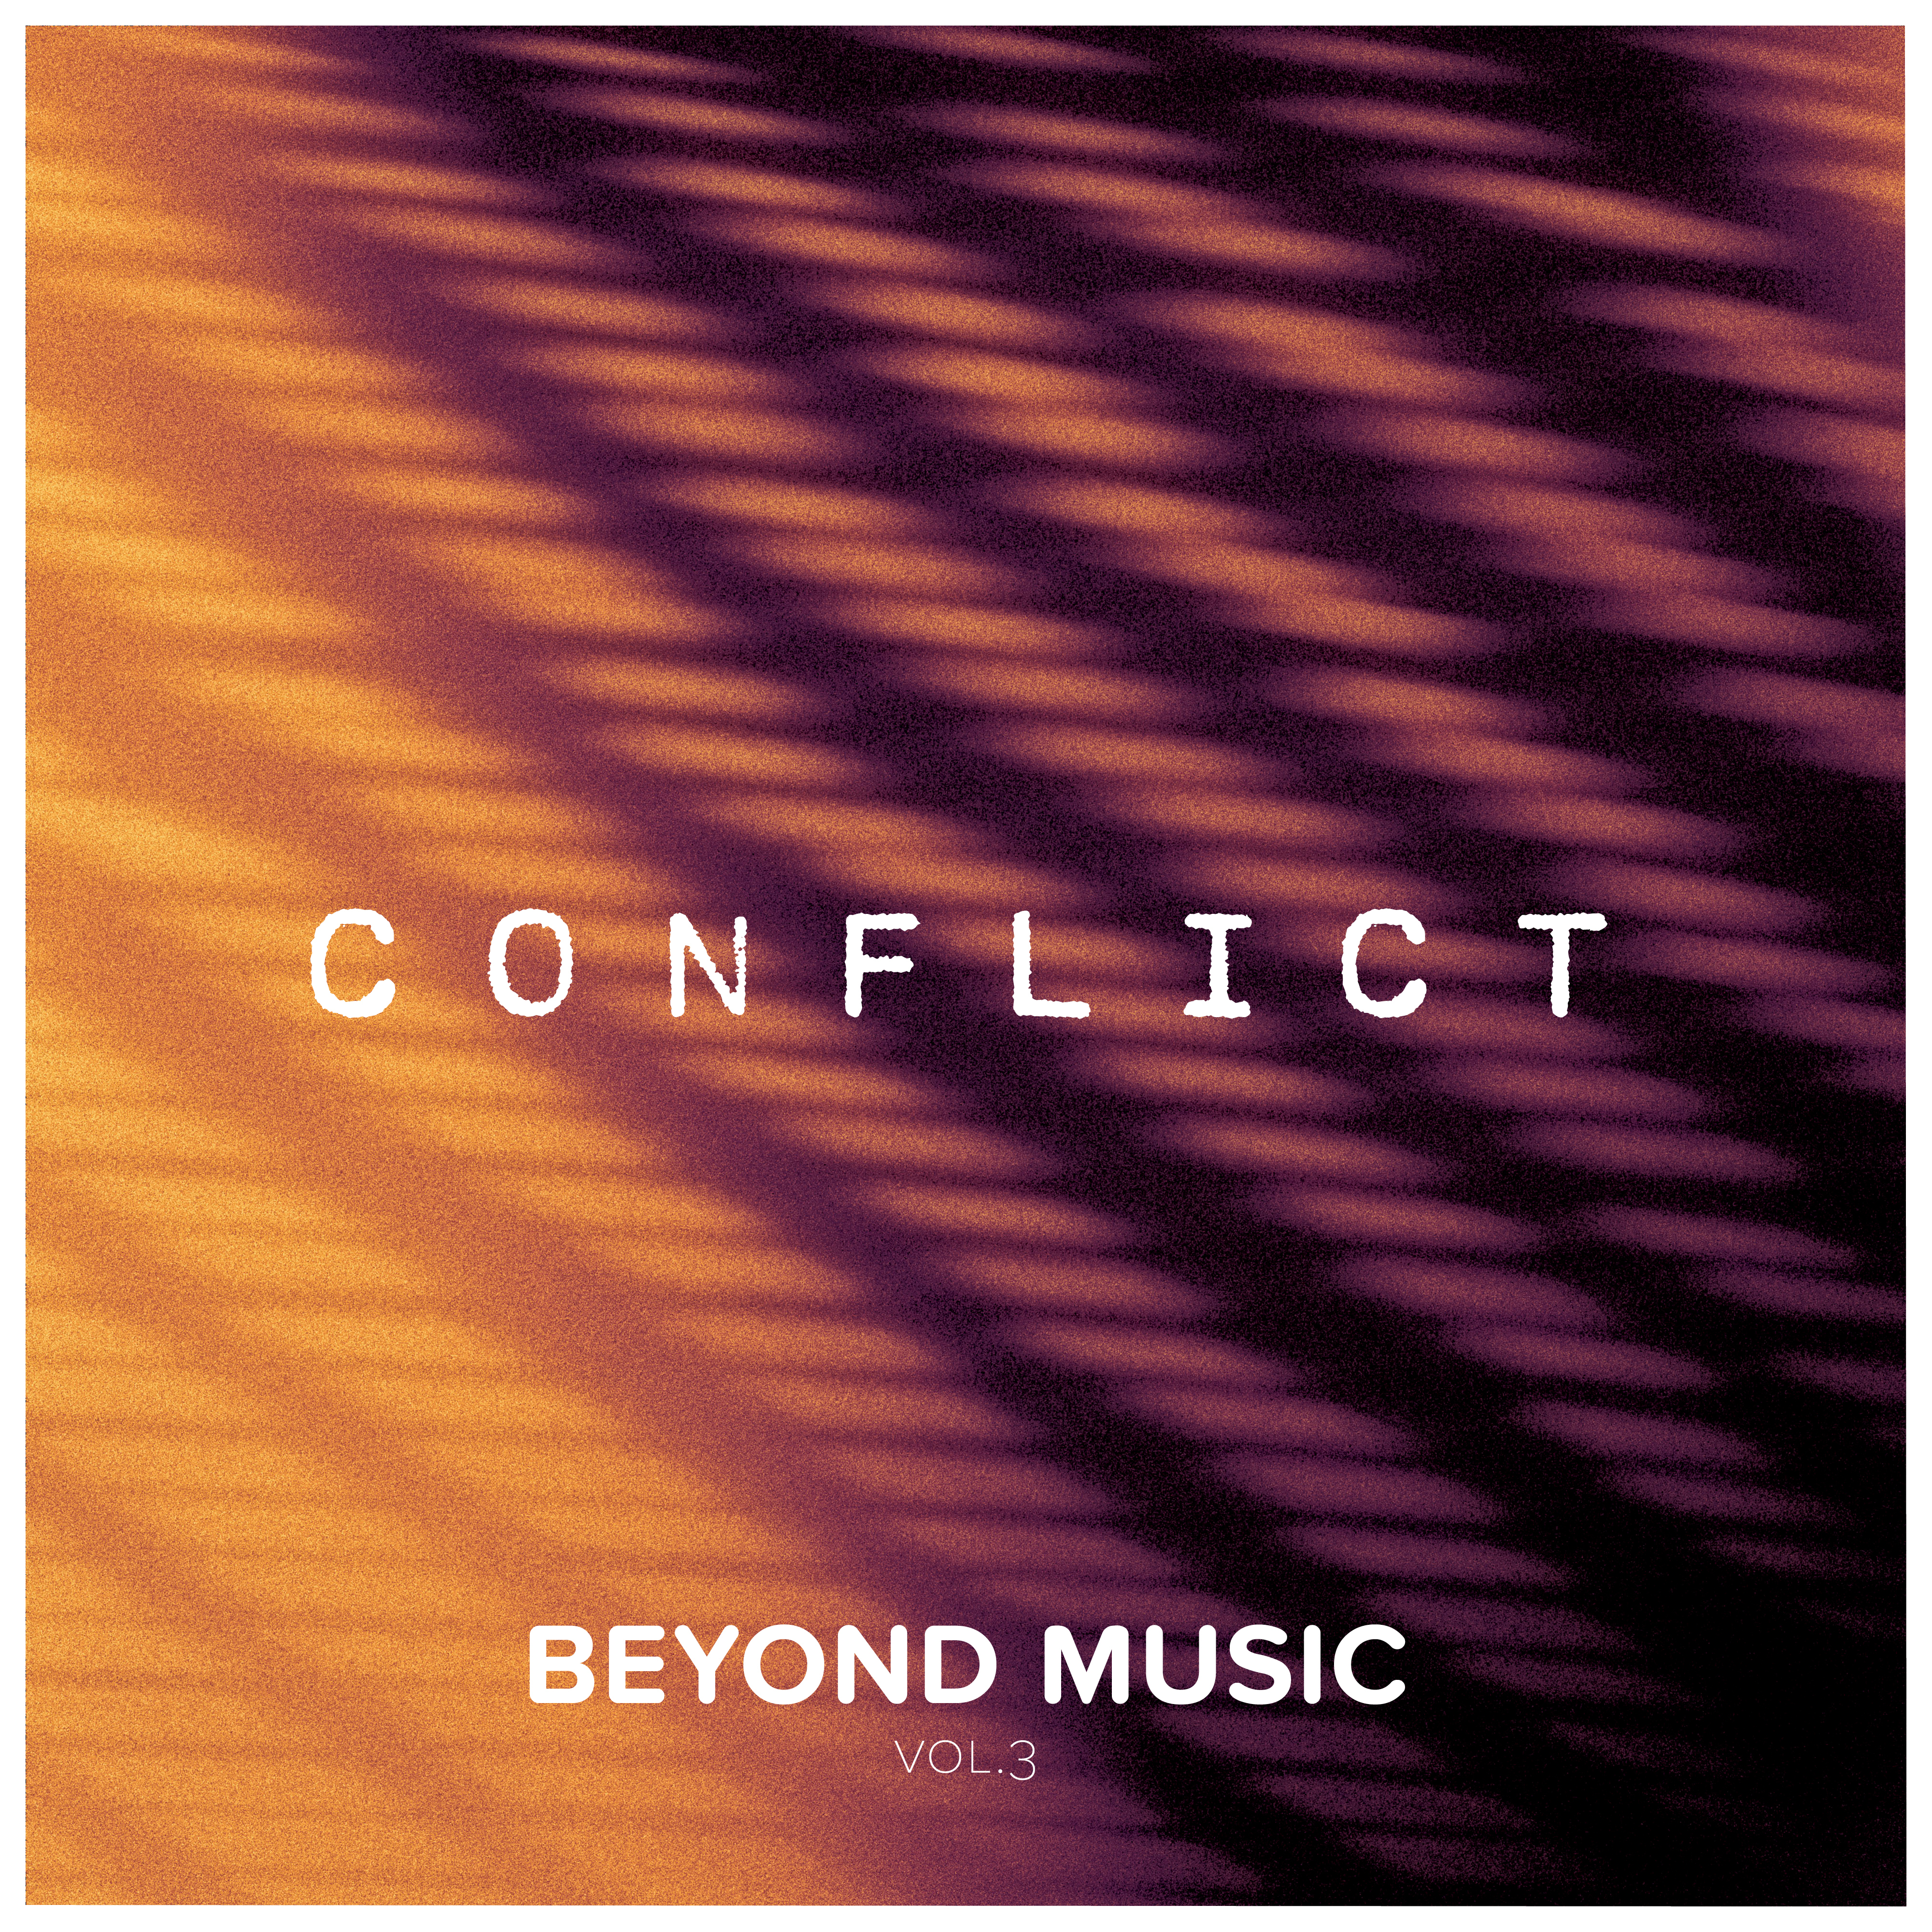 Beyond Music Vol.3 CONFLICT